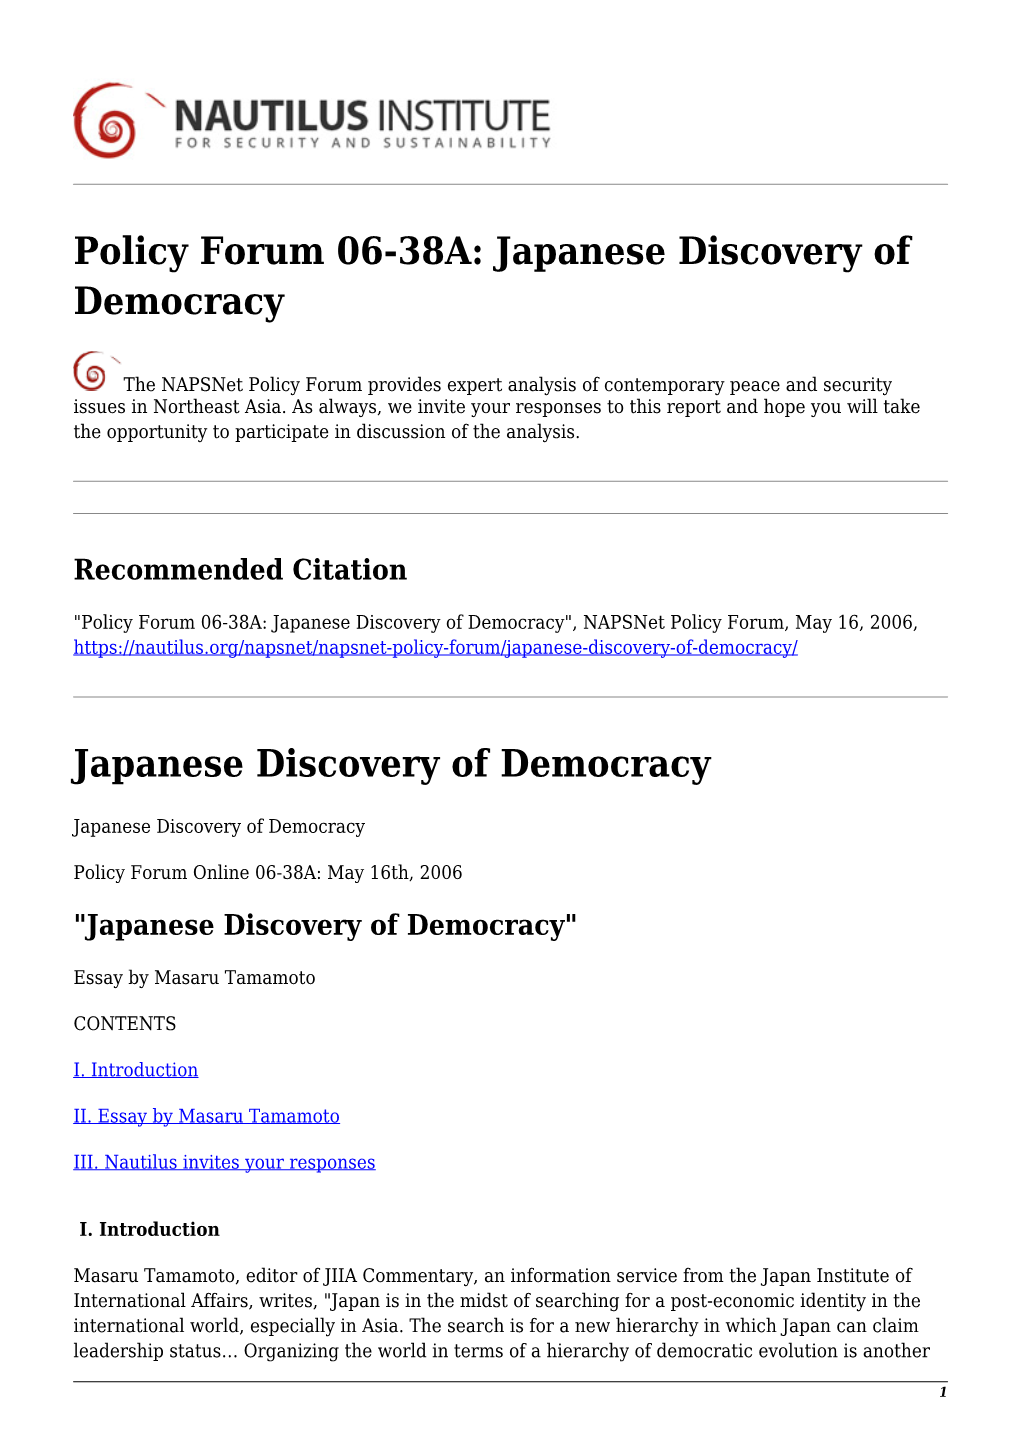 Japanese Discovery of Democracy